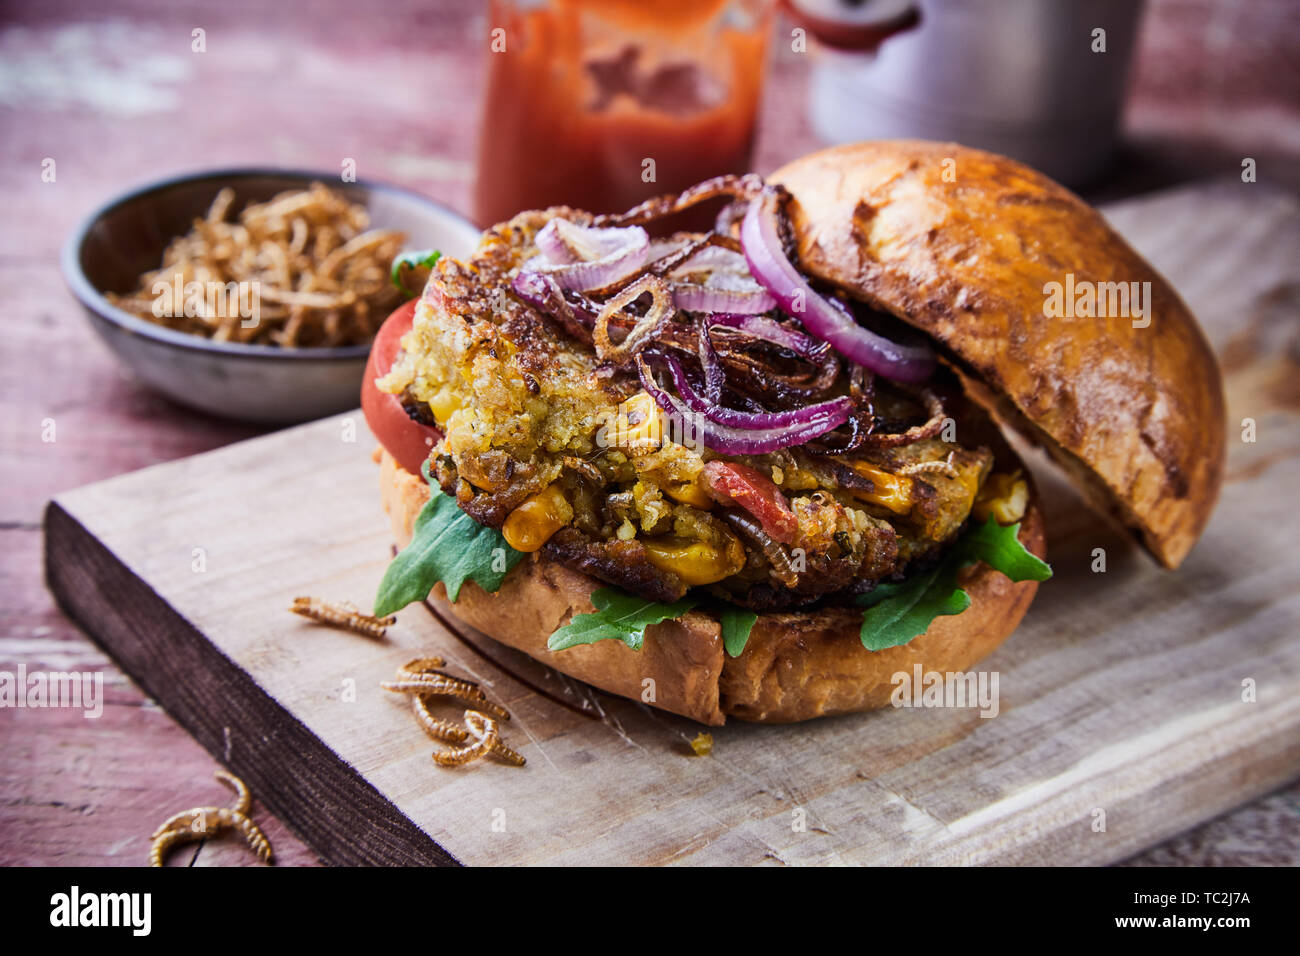 Speciality insect burger with fried mealworms and salad trimmings with rocket on a crusty fresh bun served on a wooden board suitable for a menu Stock Photo